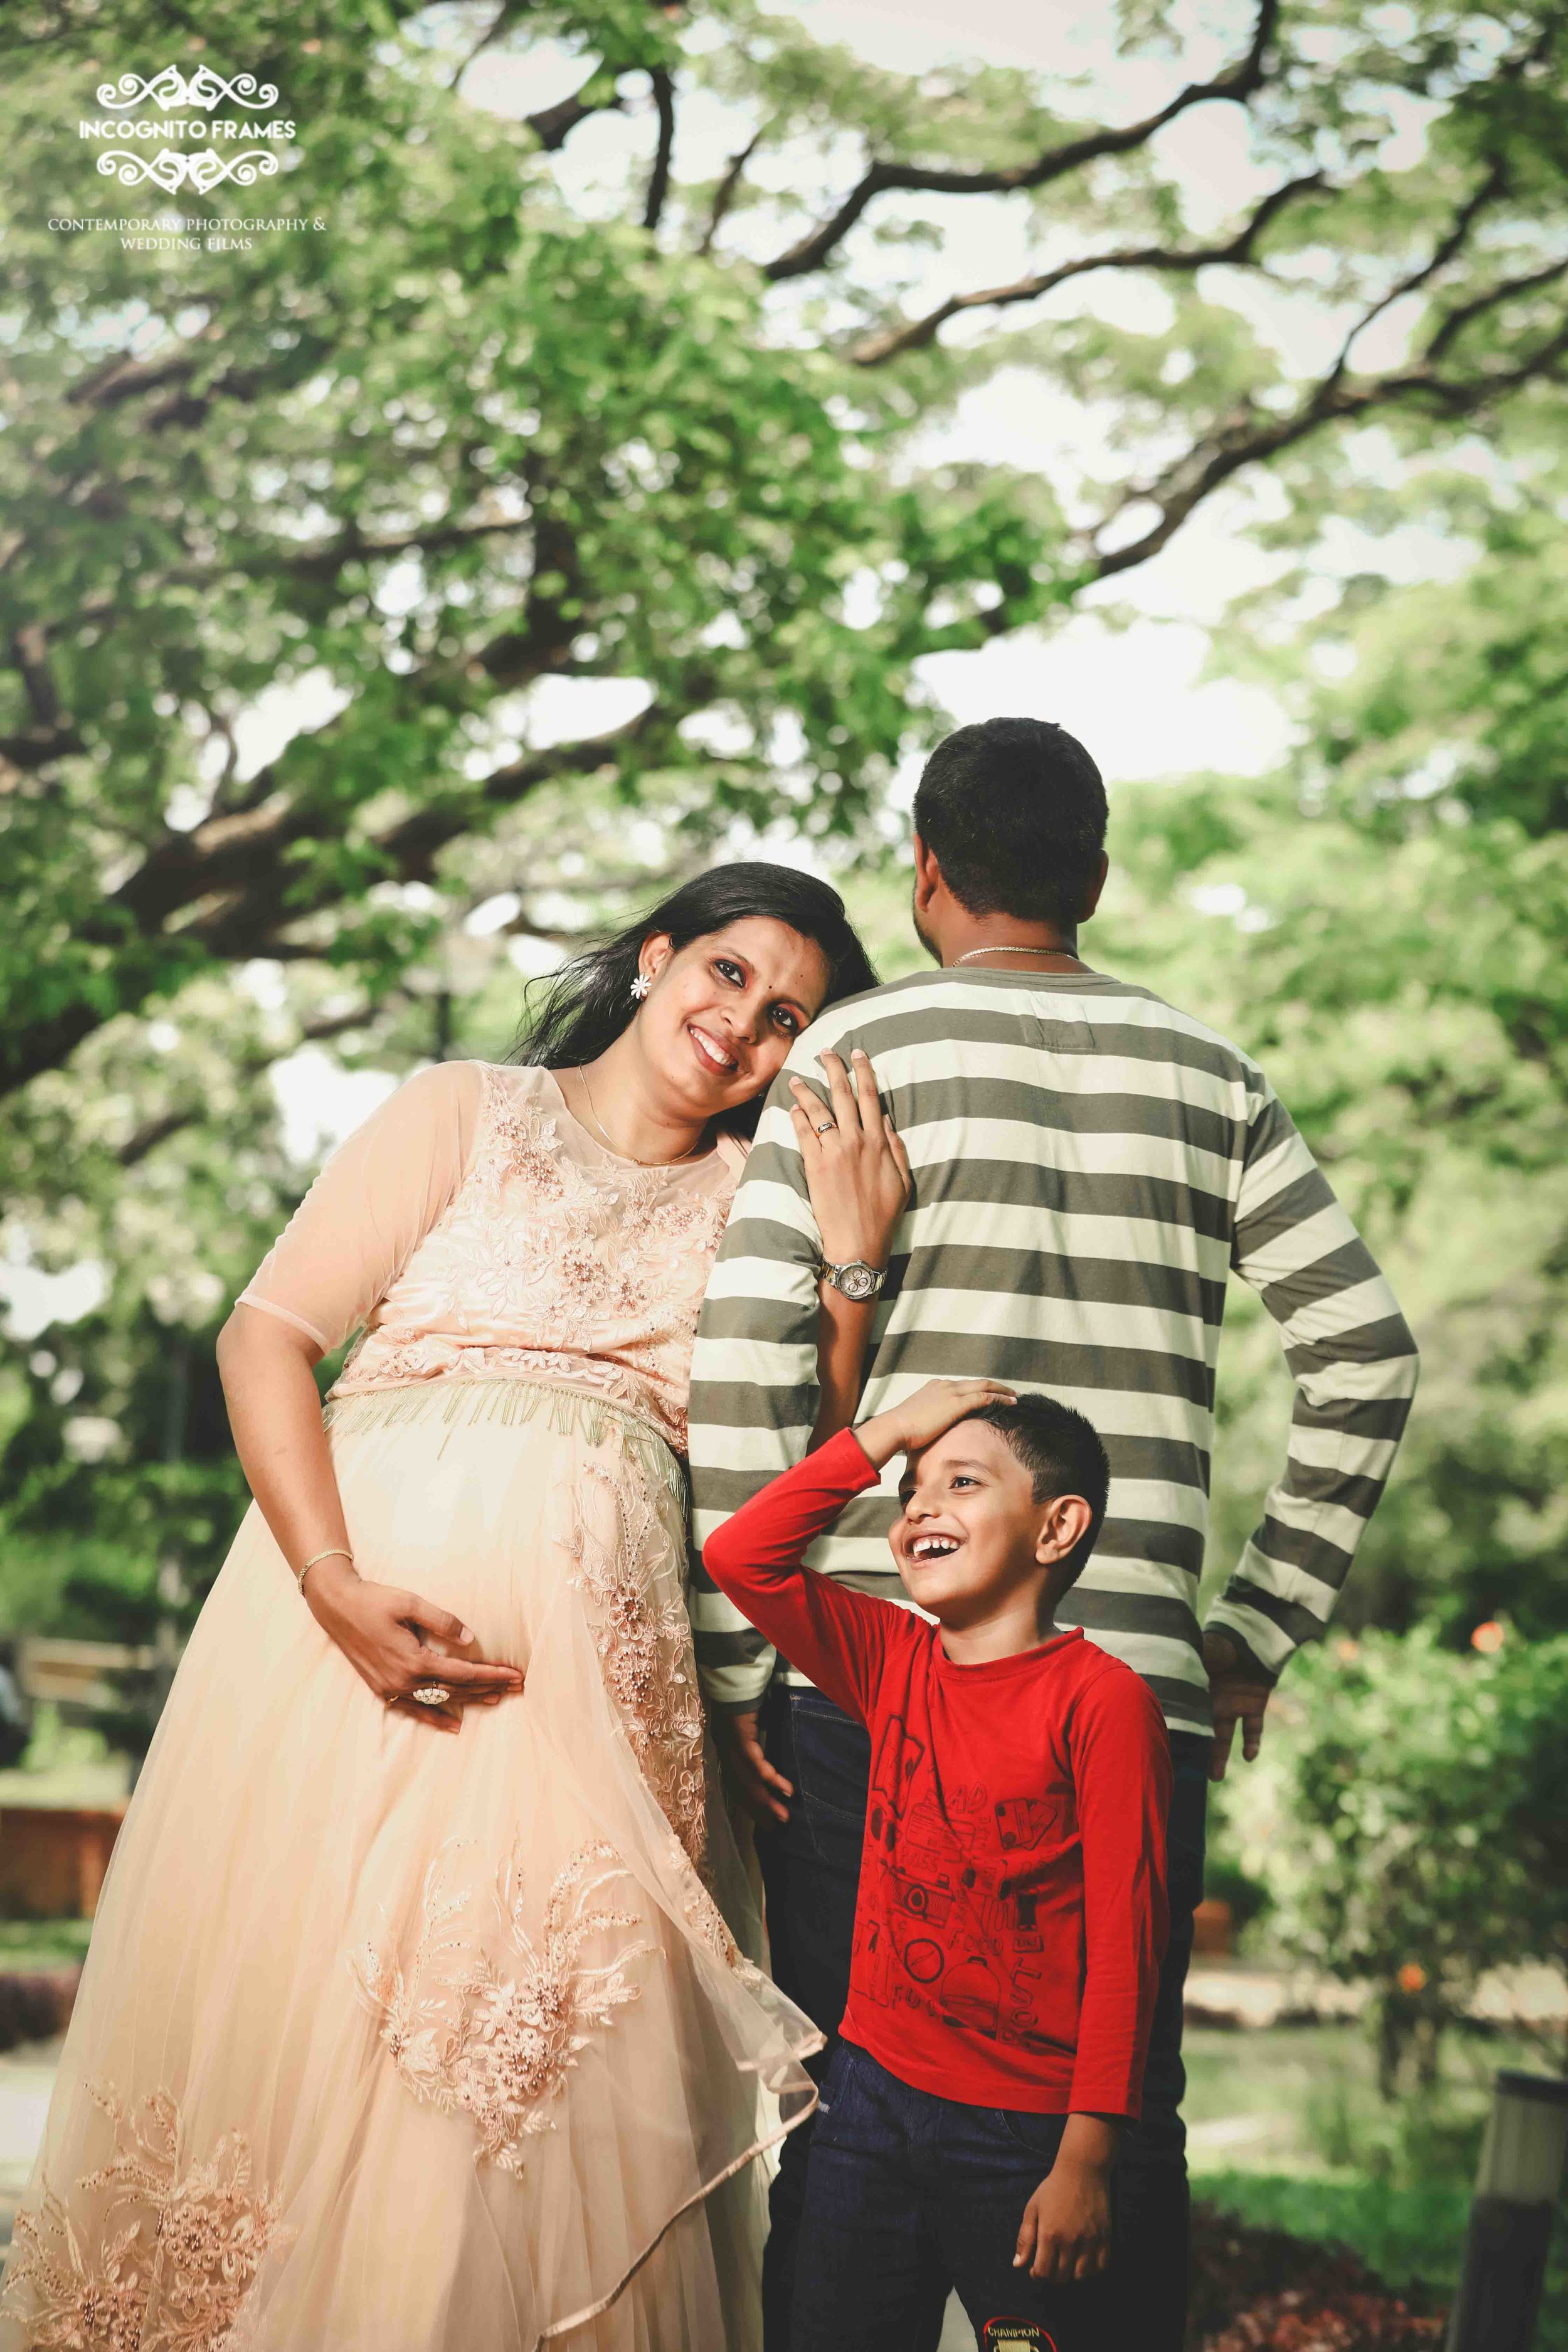 Rising Baby Photography in Panchkula,Chandigarh - Best Photographers in  Chandigarh - Justdial